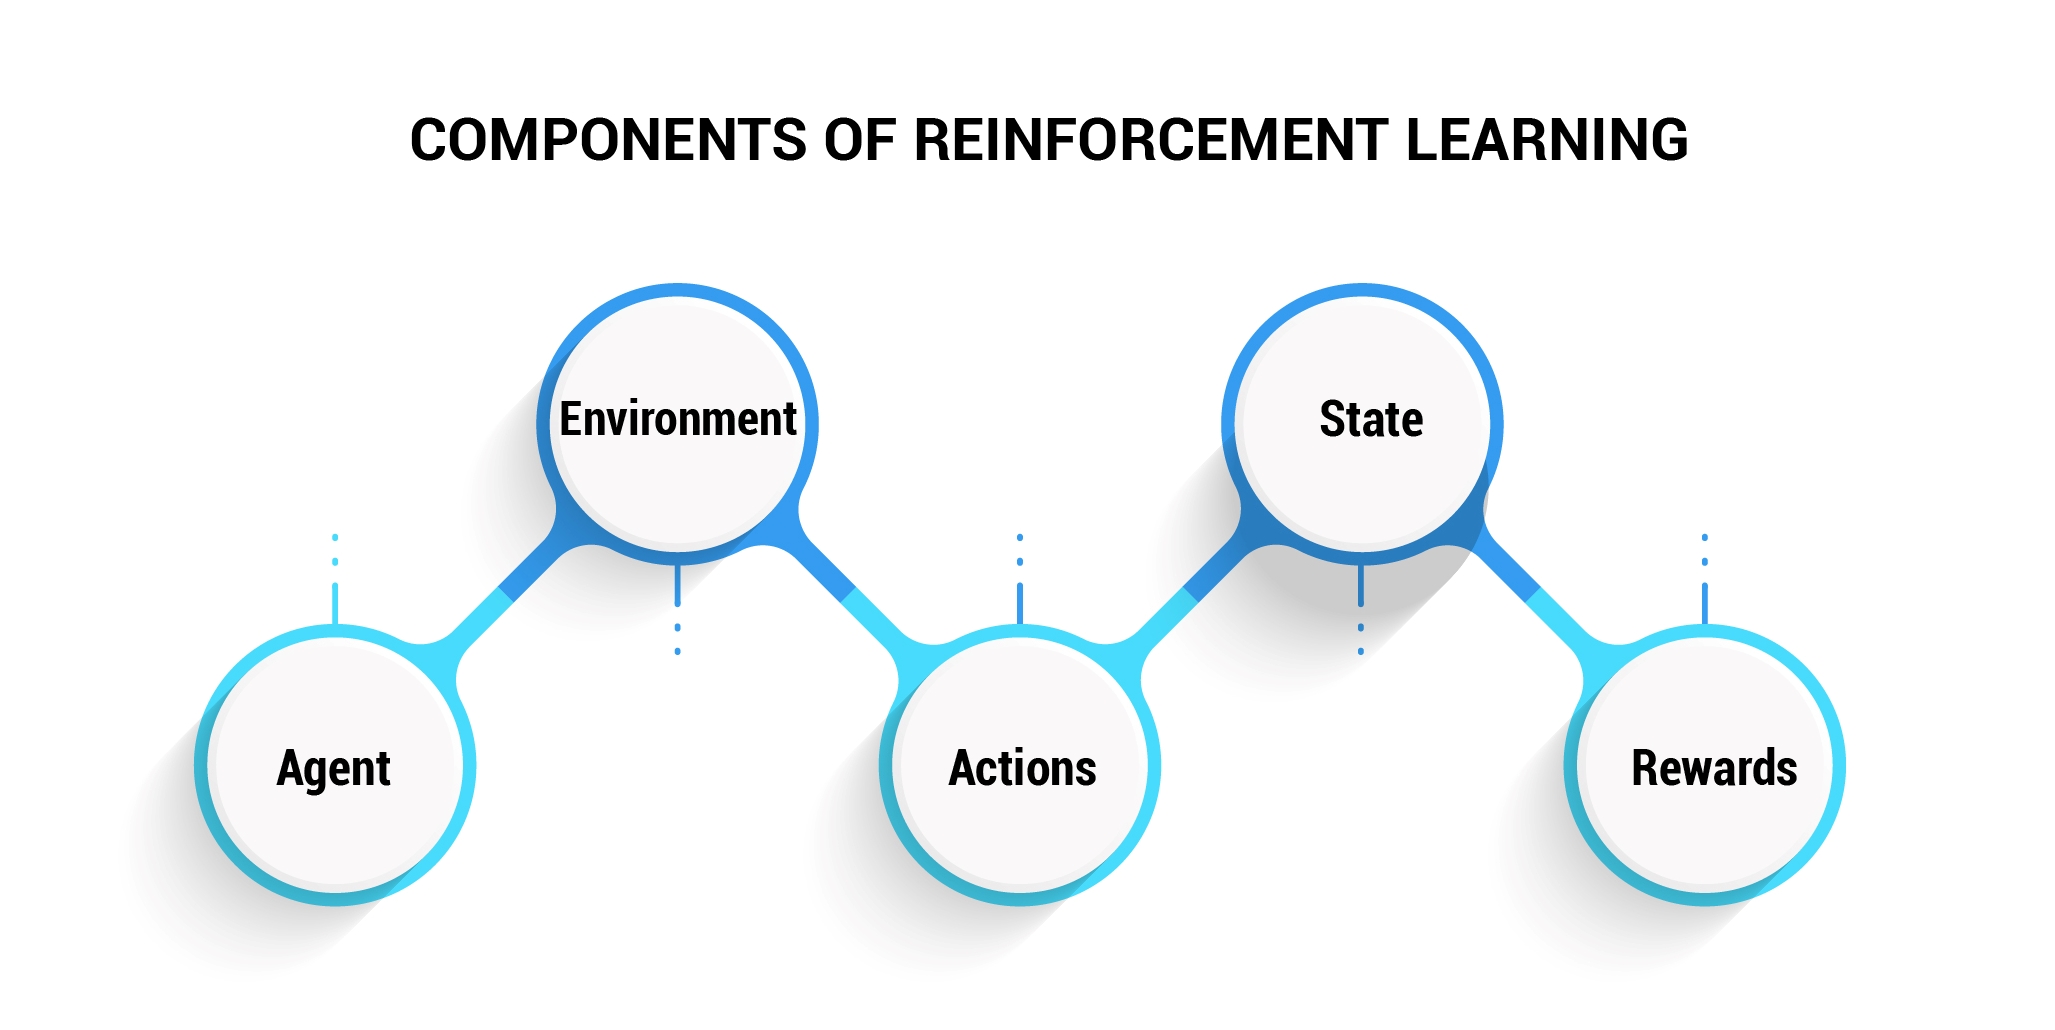 Components of Reinforcement Learning